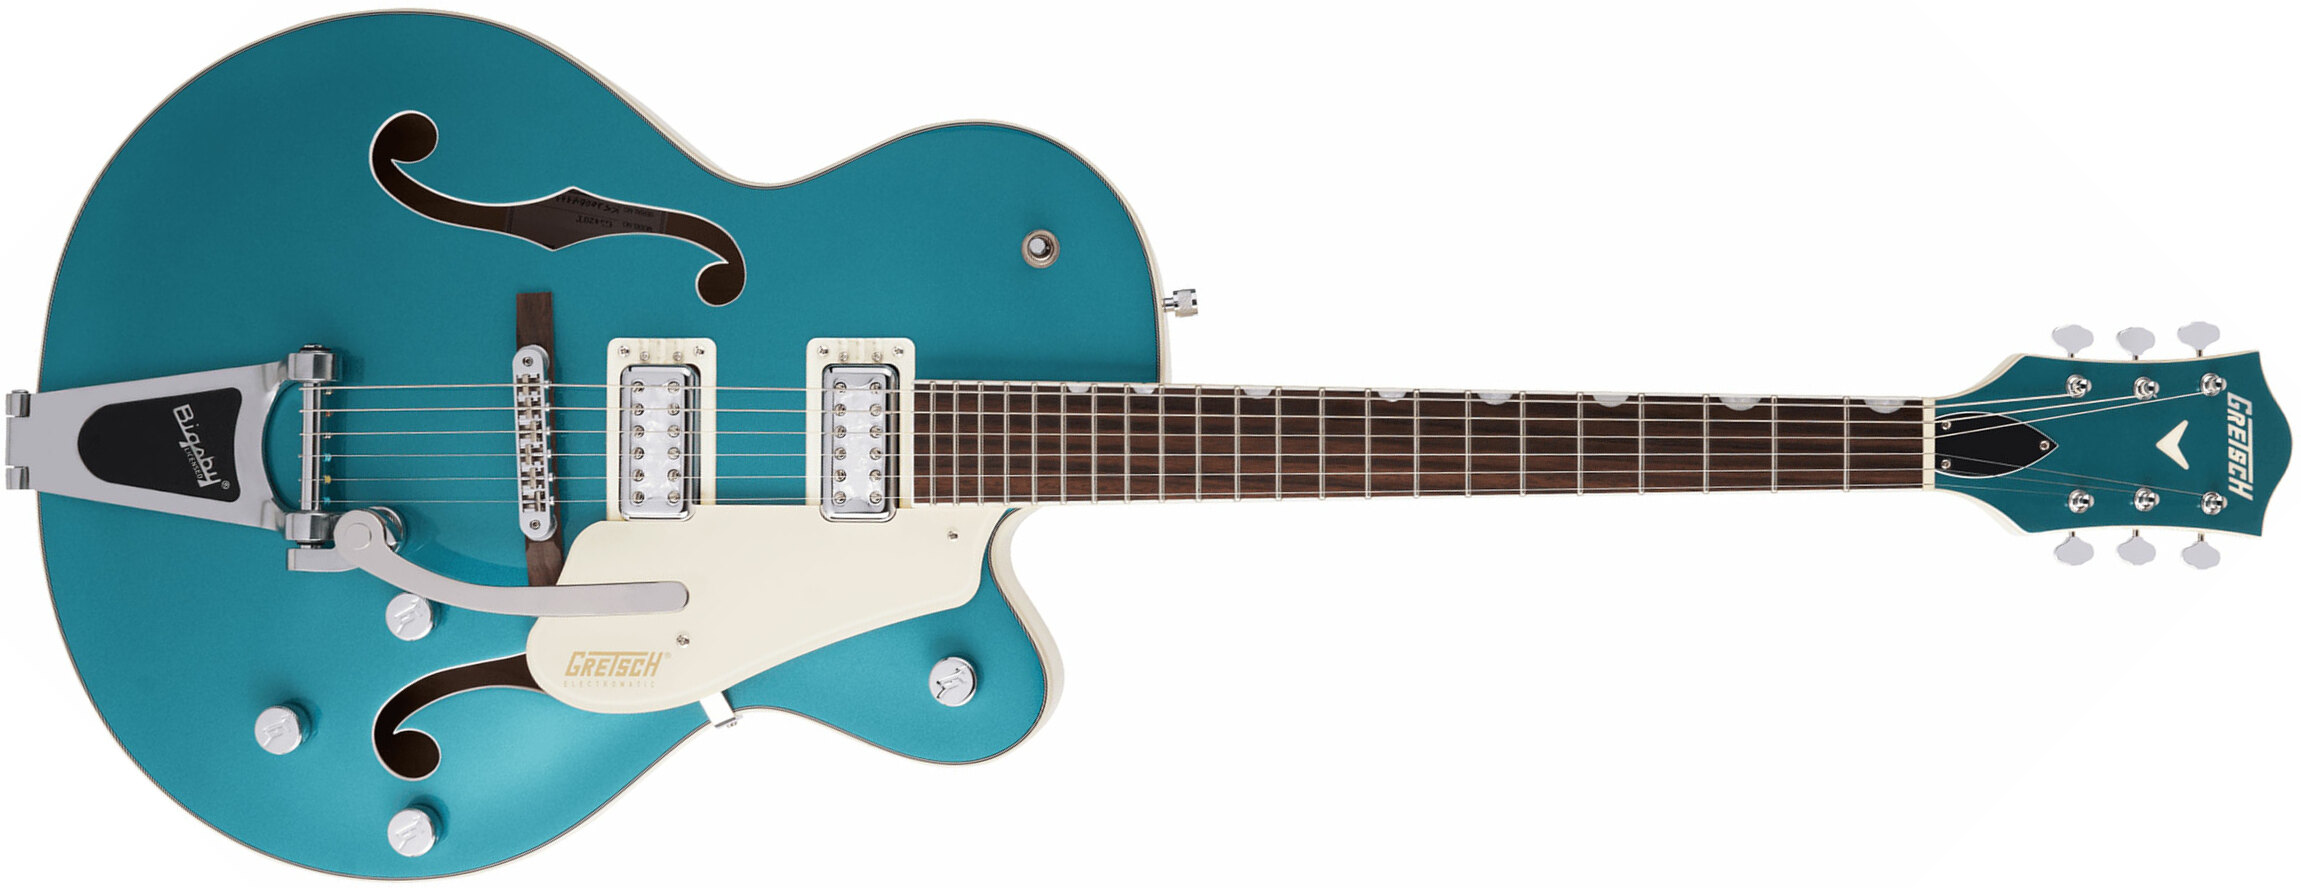 Gretsch G5410t Tri-five Electromatic Hollow Hh Bigsby Rw - Two-tone Ocean Turquoise/vintage White - Guitarra eléctrica semi caja - Main picture